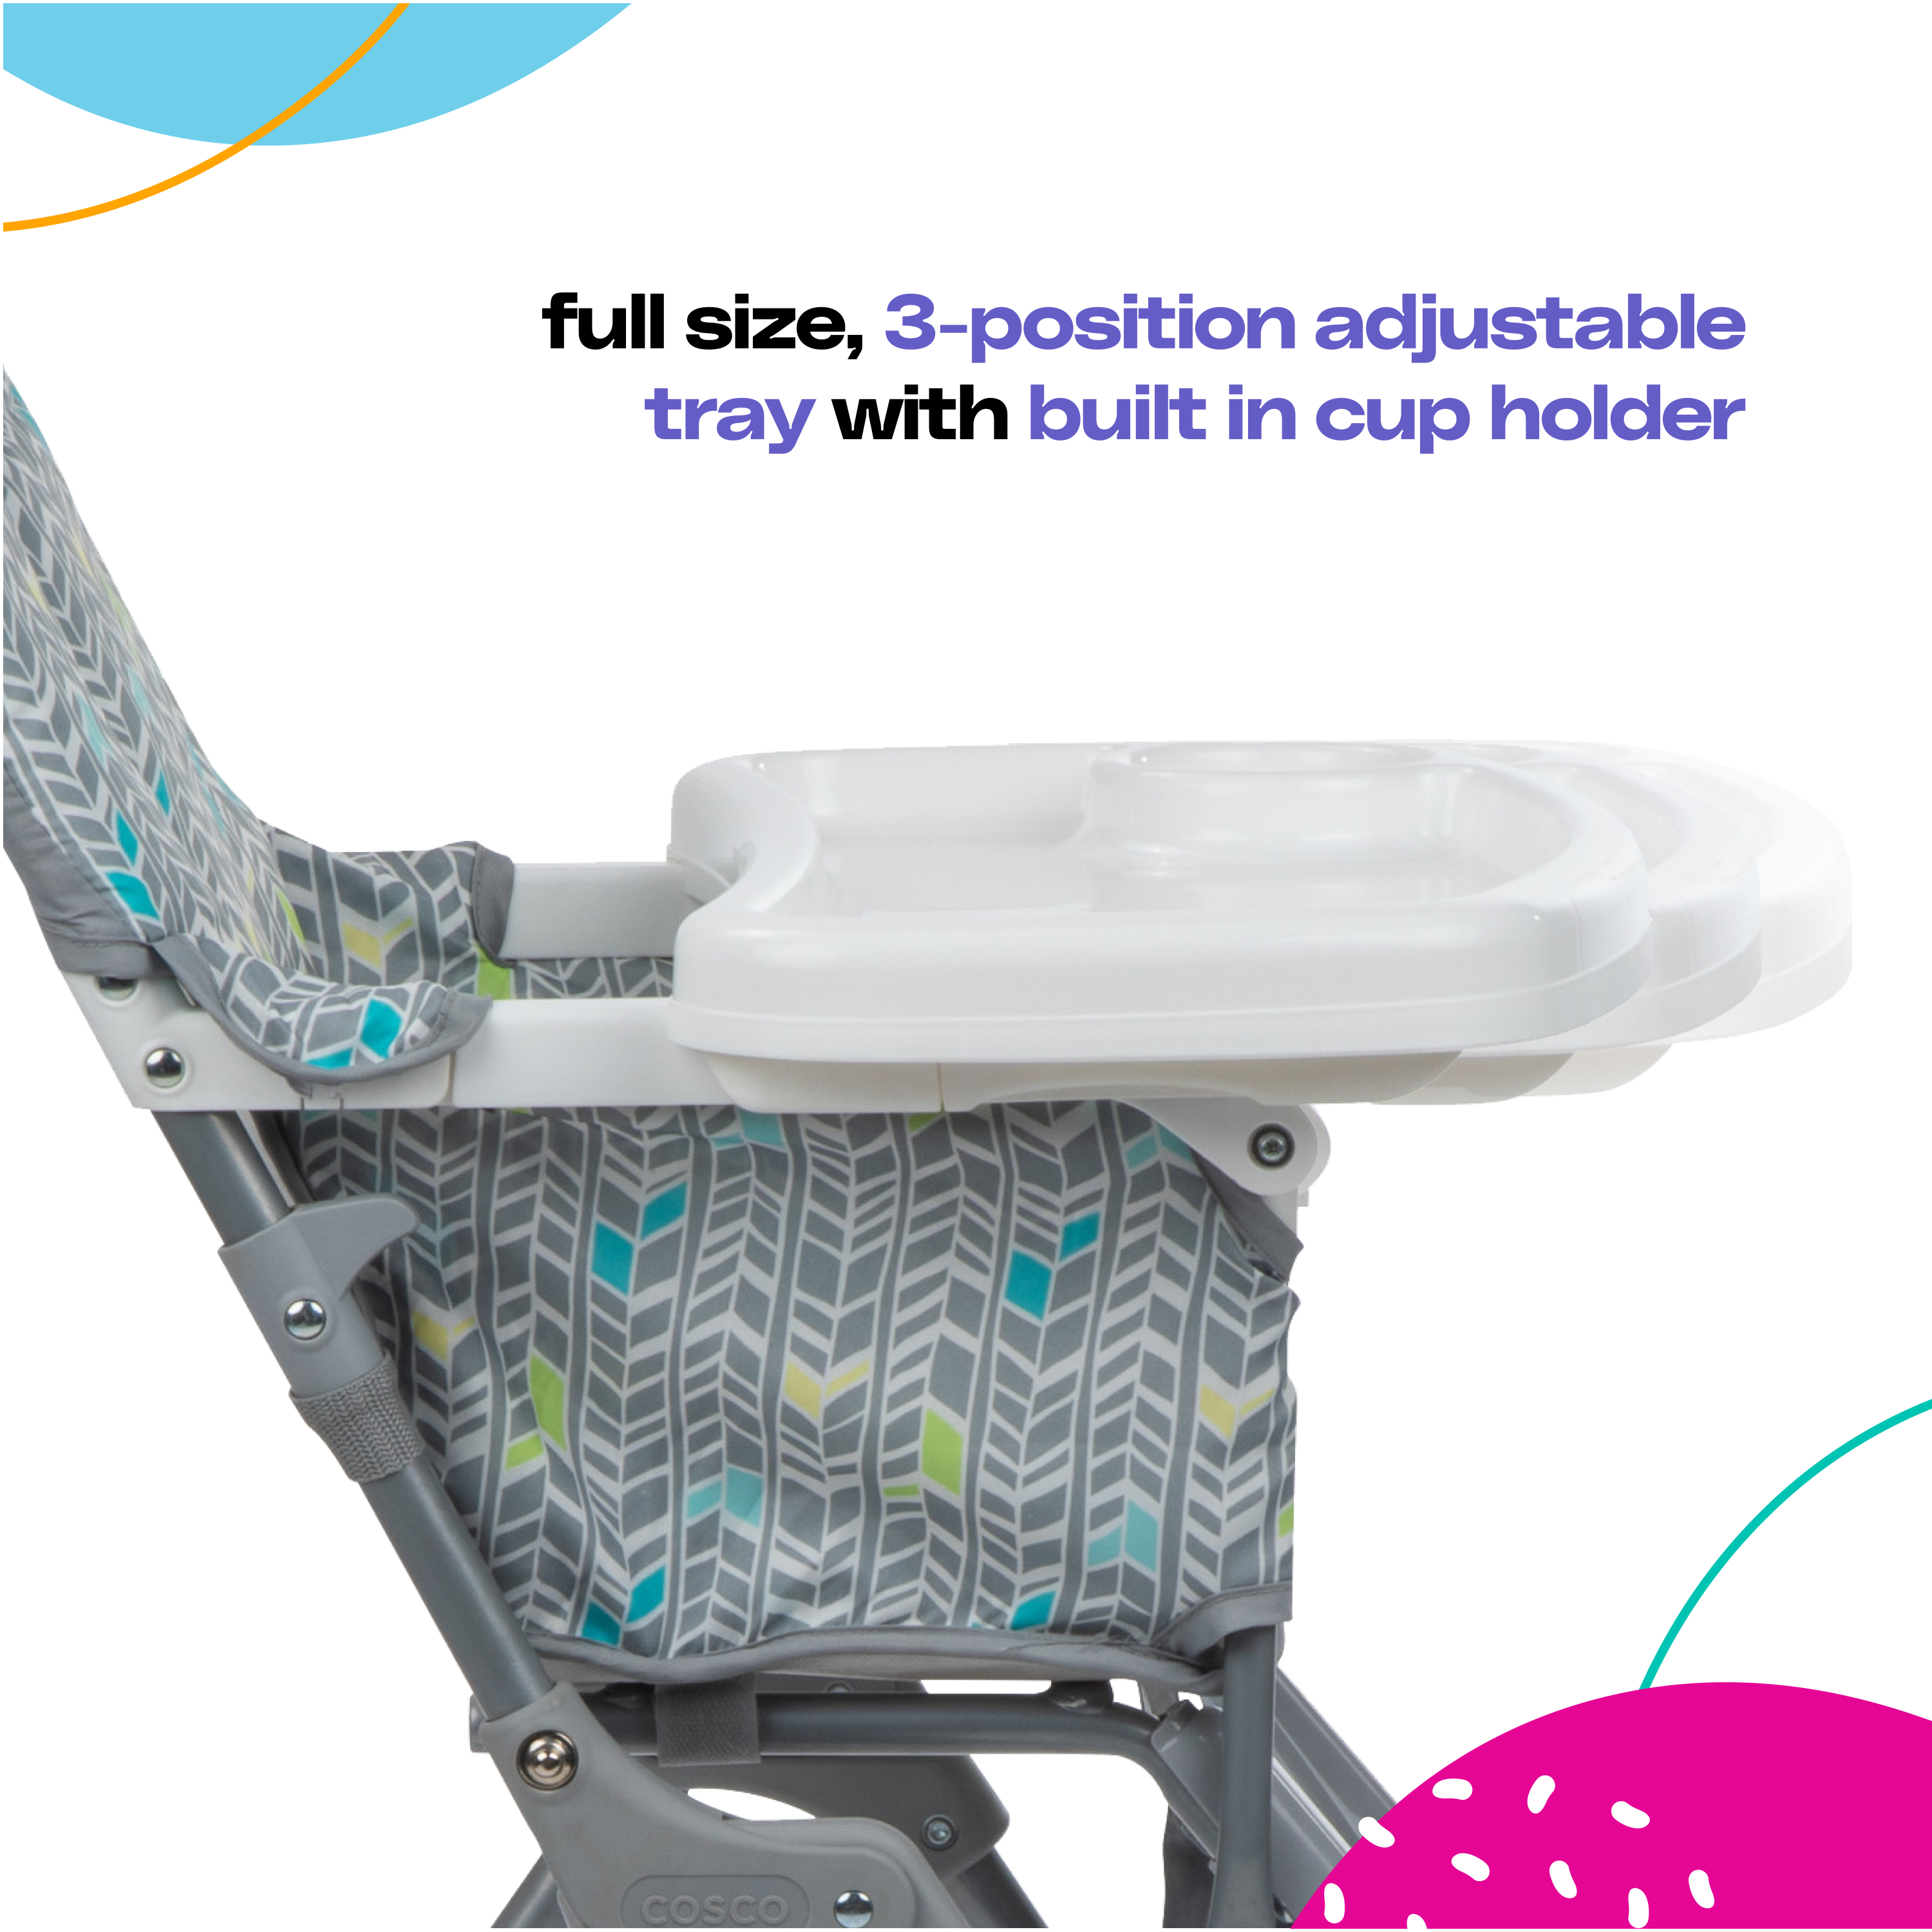 Simple Fold™ Full Size High Chair with Adjustable Tray - full size, 3-position adjustable tray with built in cup holder